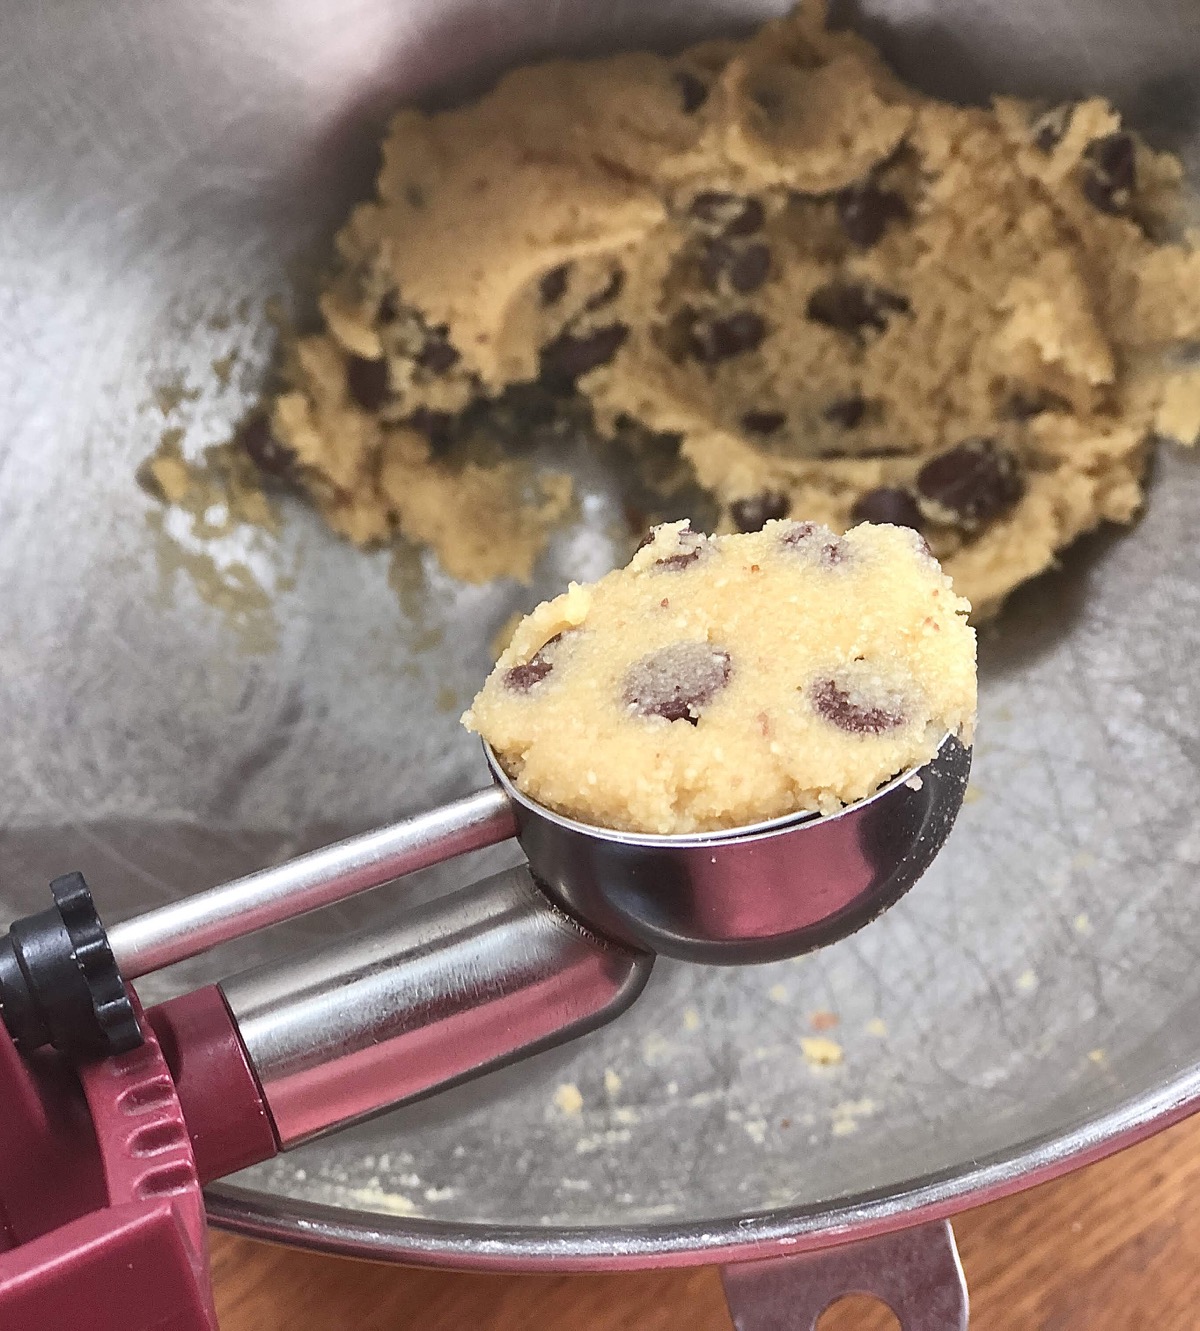 Scooping dough for Gluten-Free Almond Flour Chocolate Chip Cookies using a tablespoon cookie scoop.